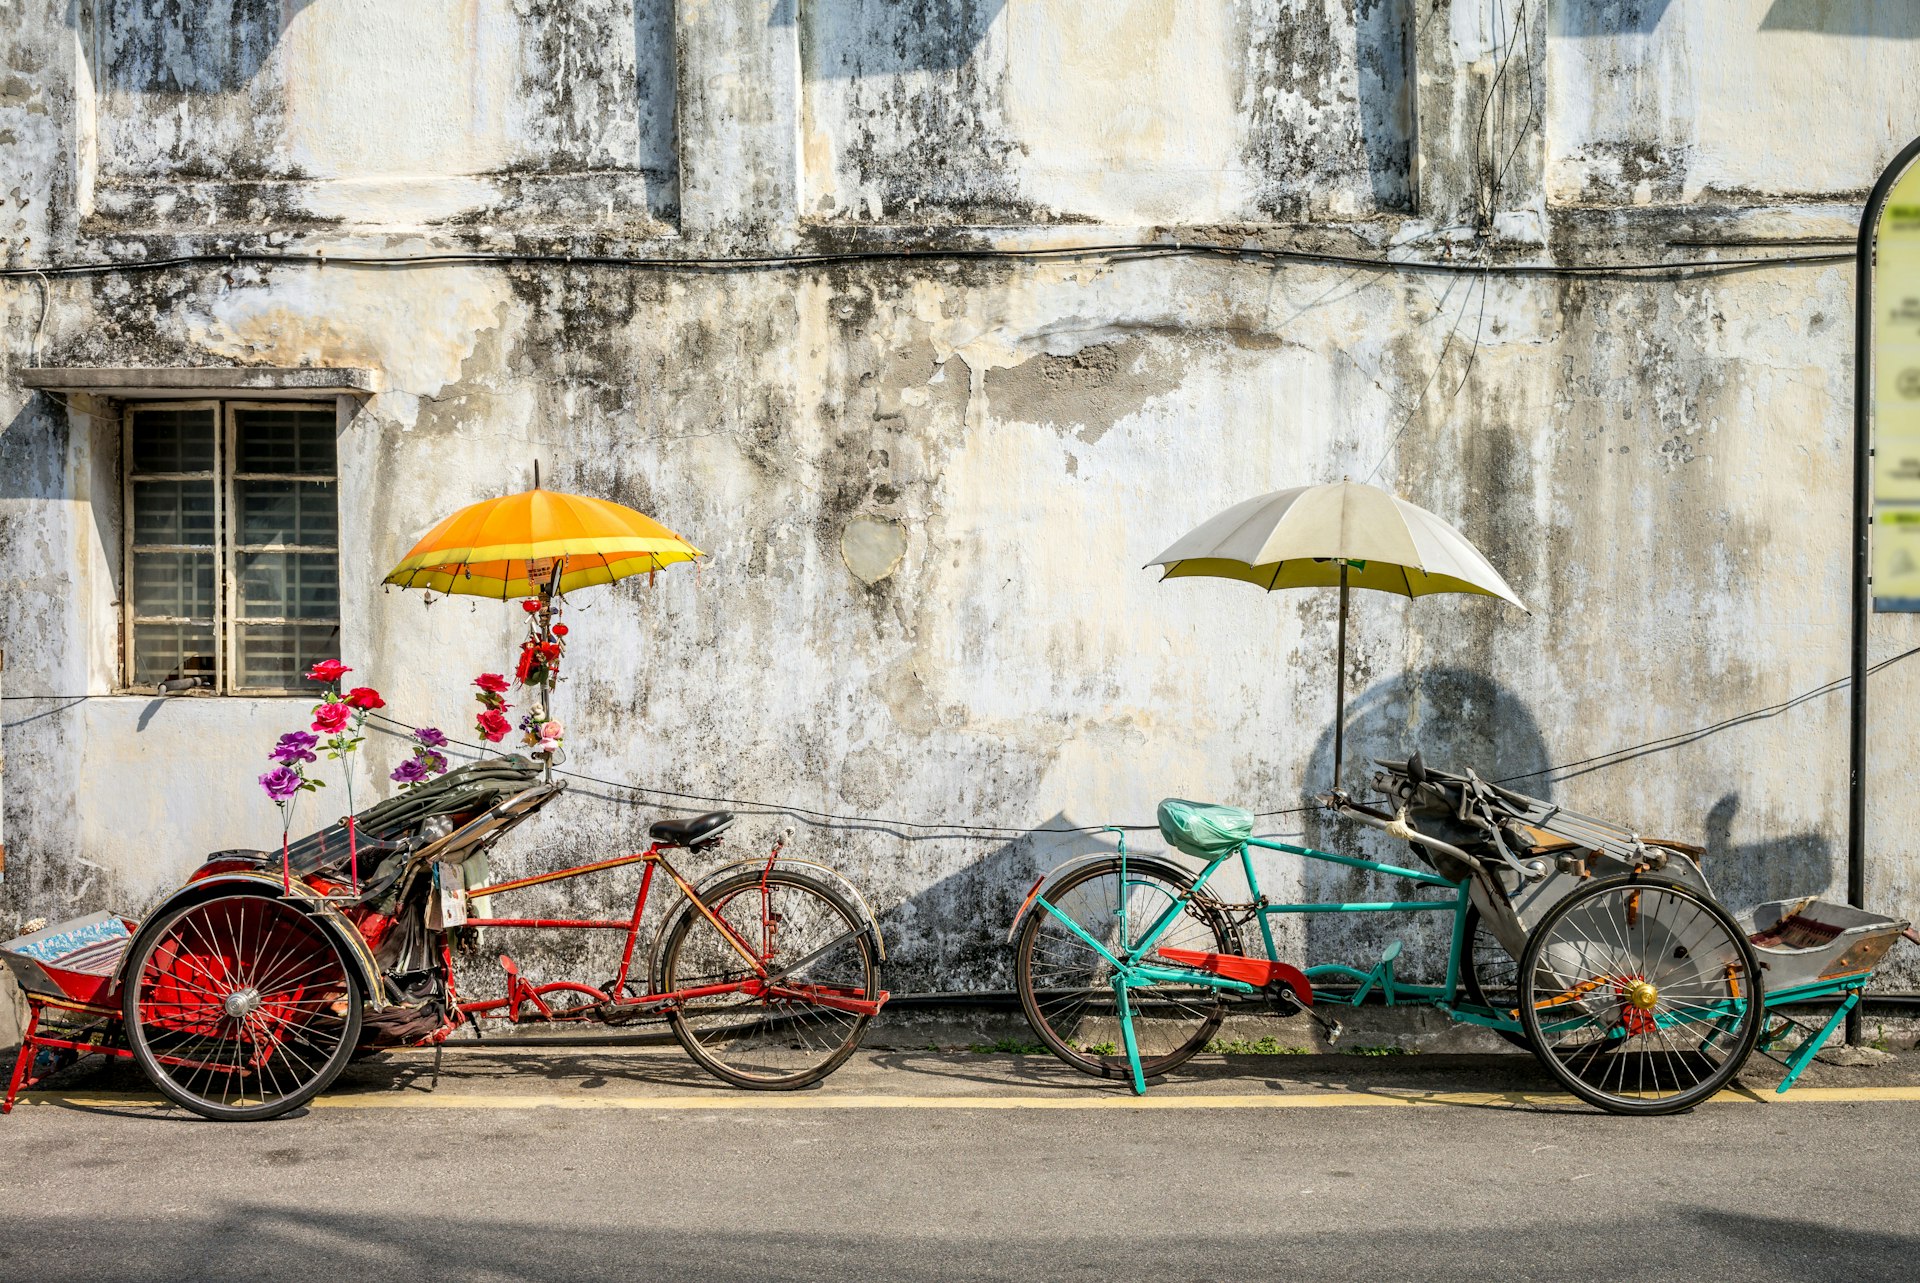 An old rickety trishaw cab parked on the sidewalk of a dilapidated building in Penang, Malaysia.